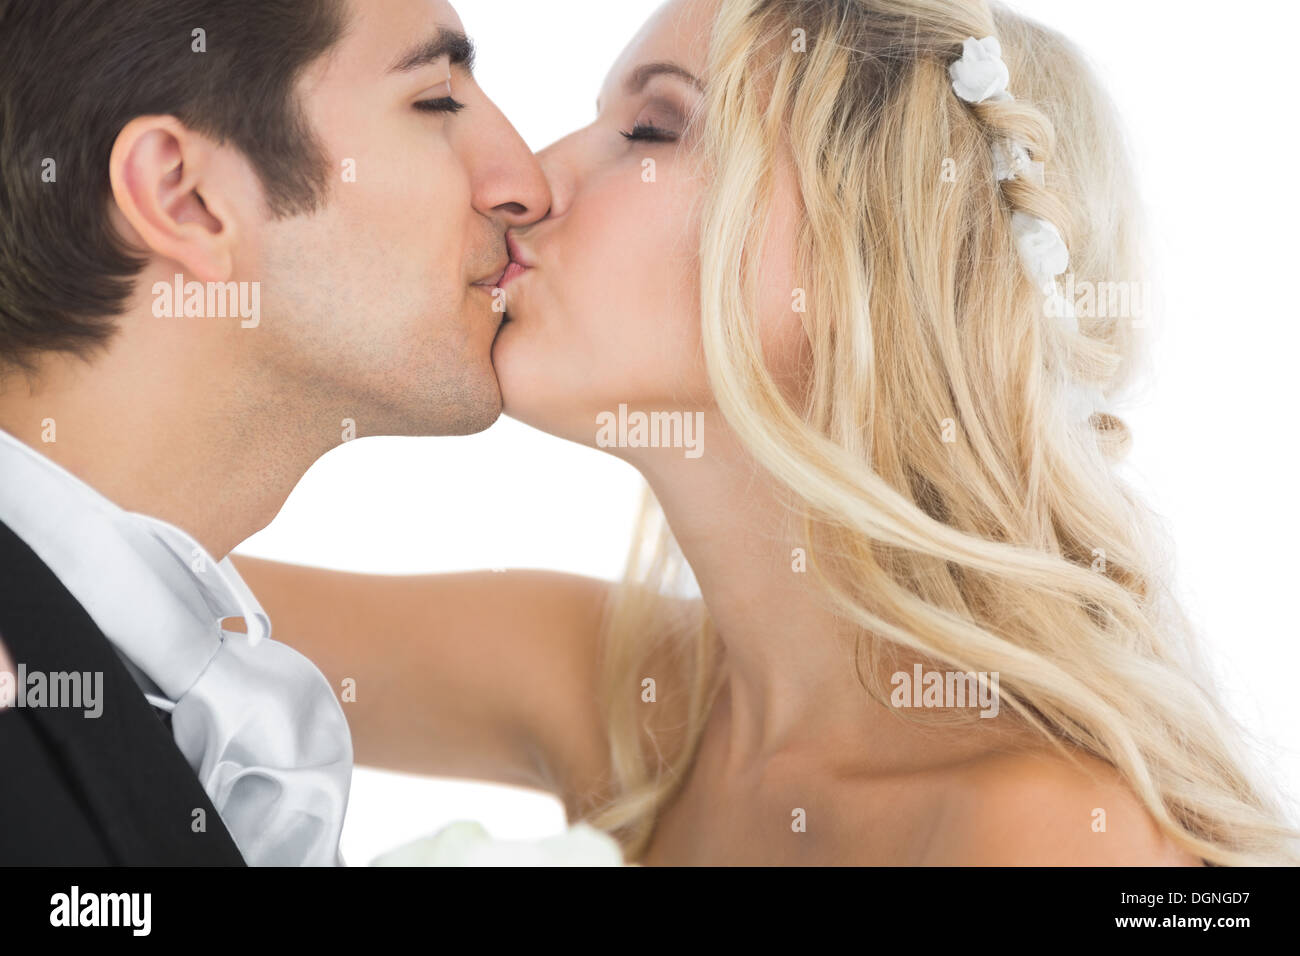 Attractive married couple kissing each other Stock Photo